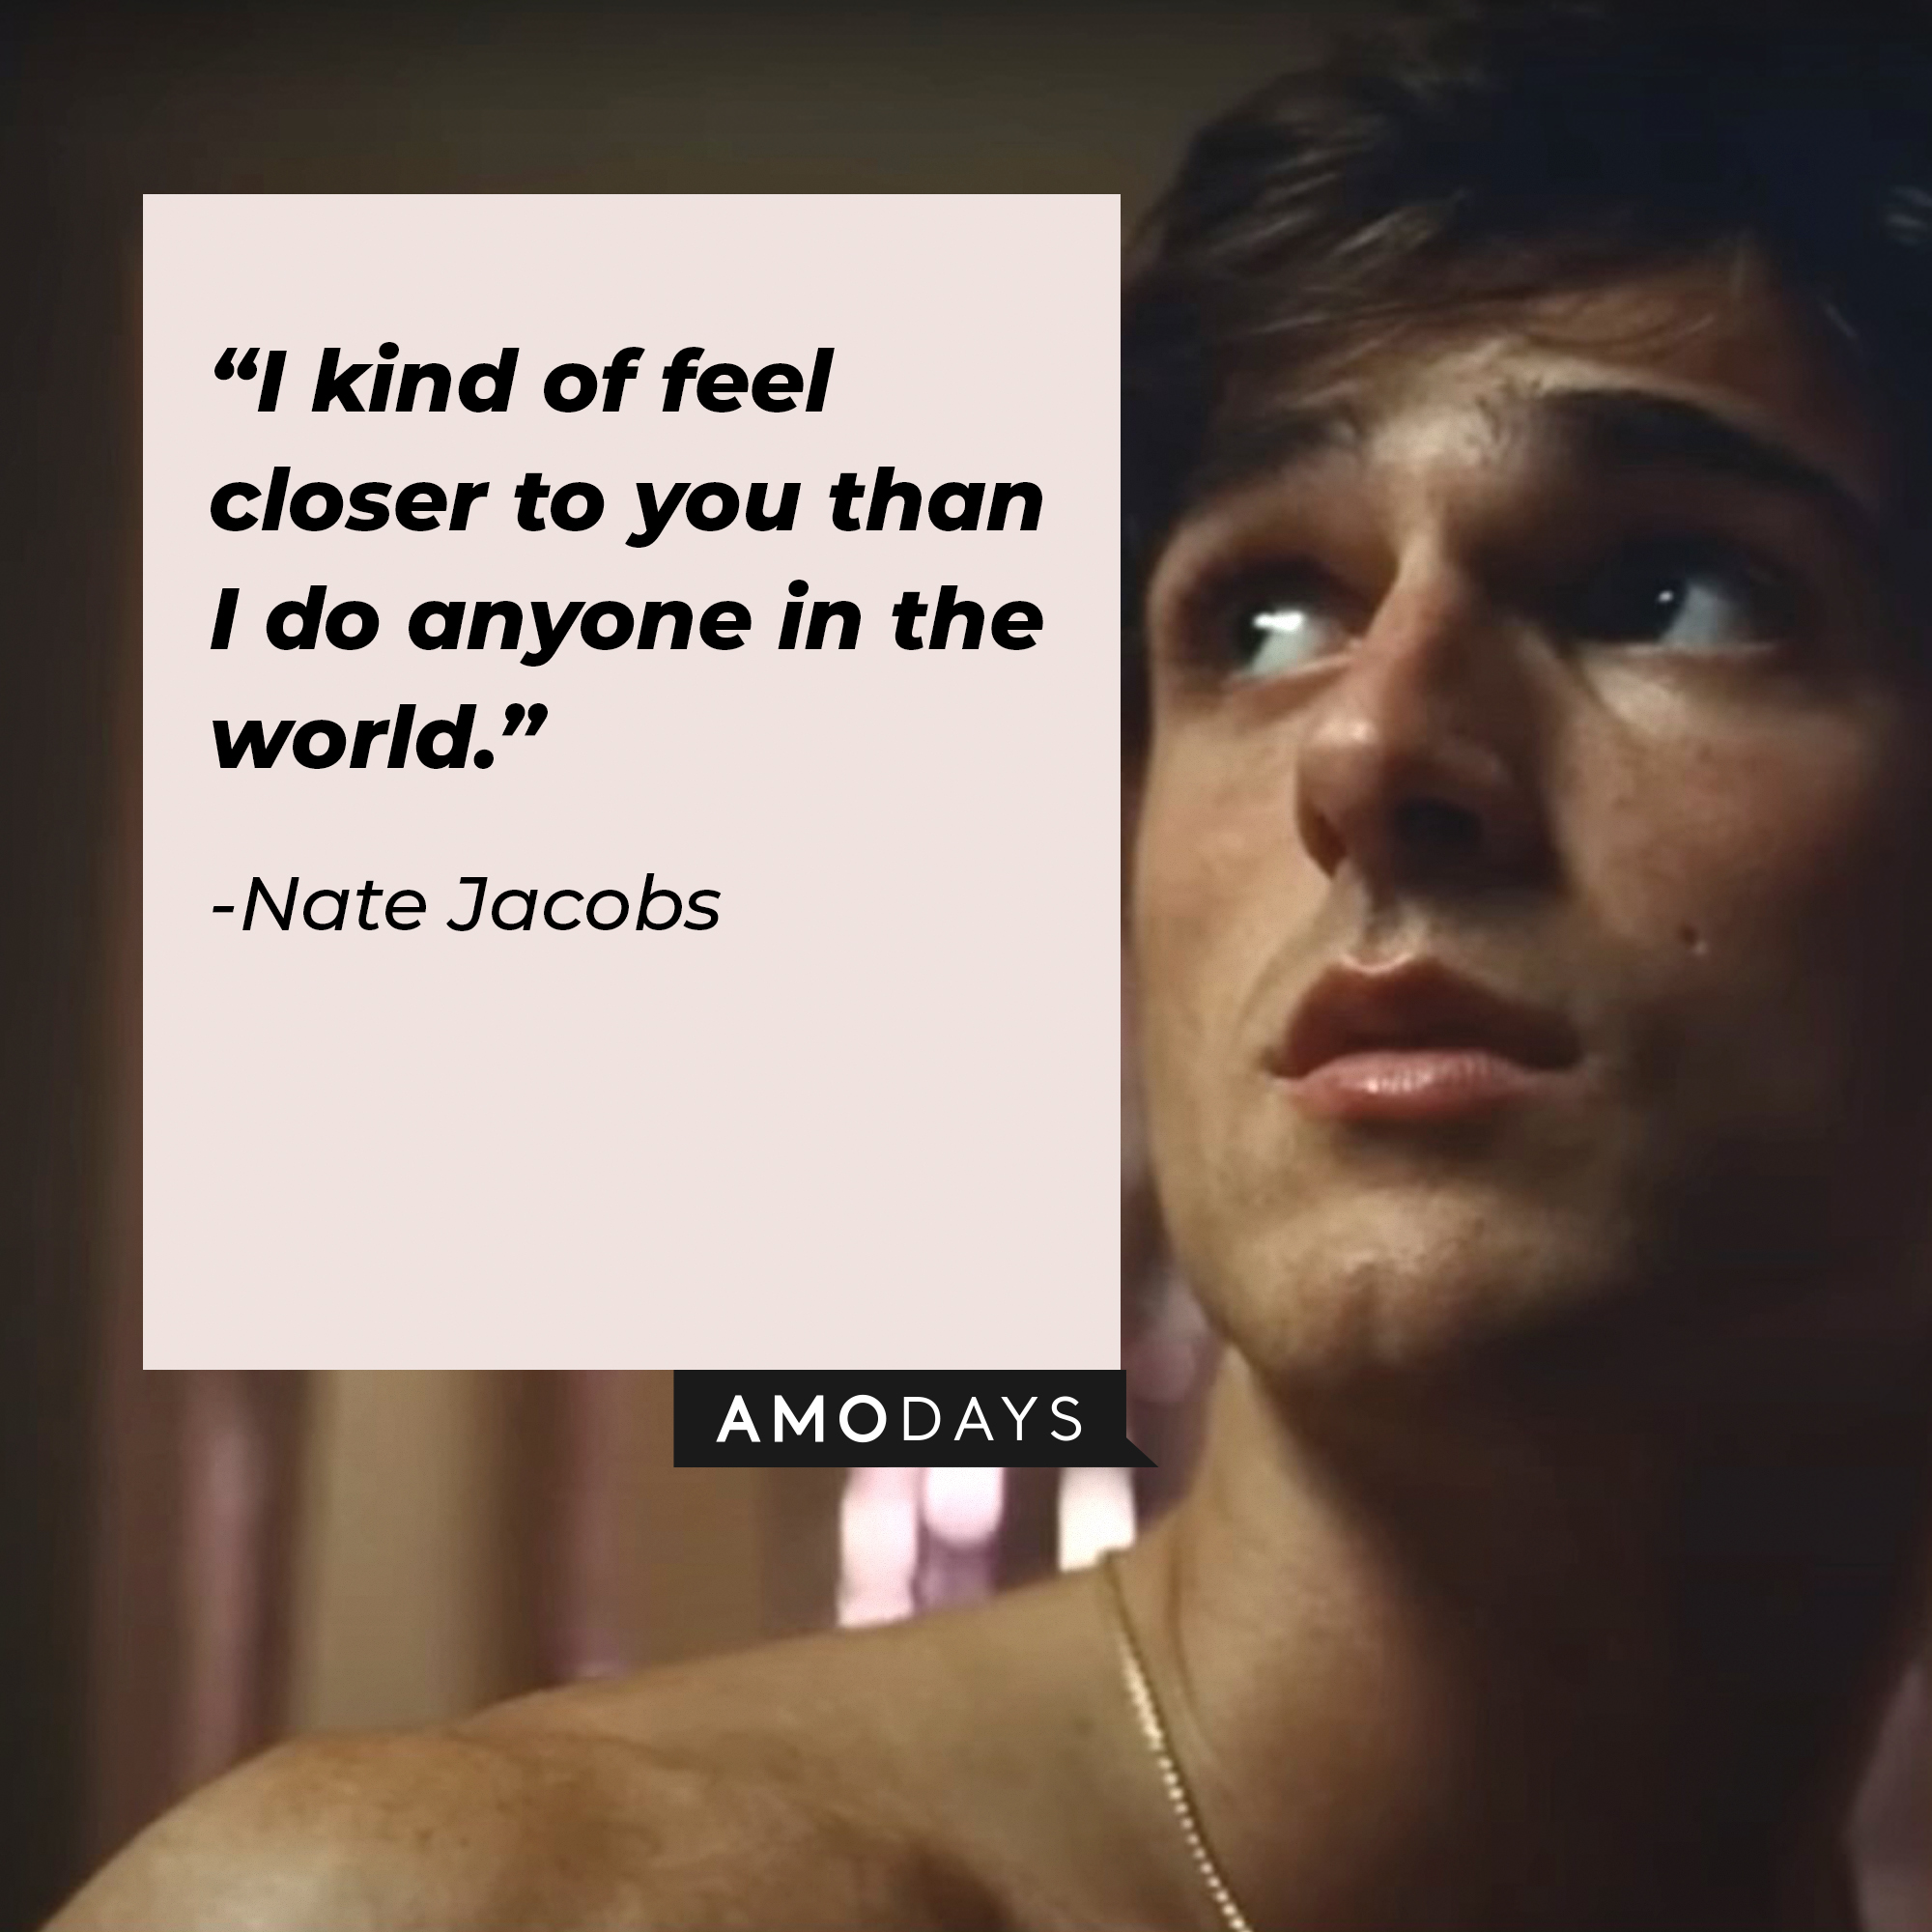 An image of Nate Jacobs with his quote: “I kind of feel closer to you than I do anyone in the world.” | Source: facebook.com/Euphoria